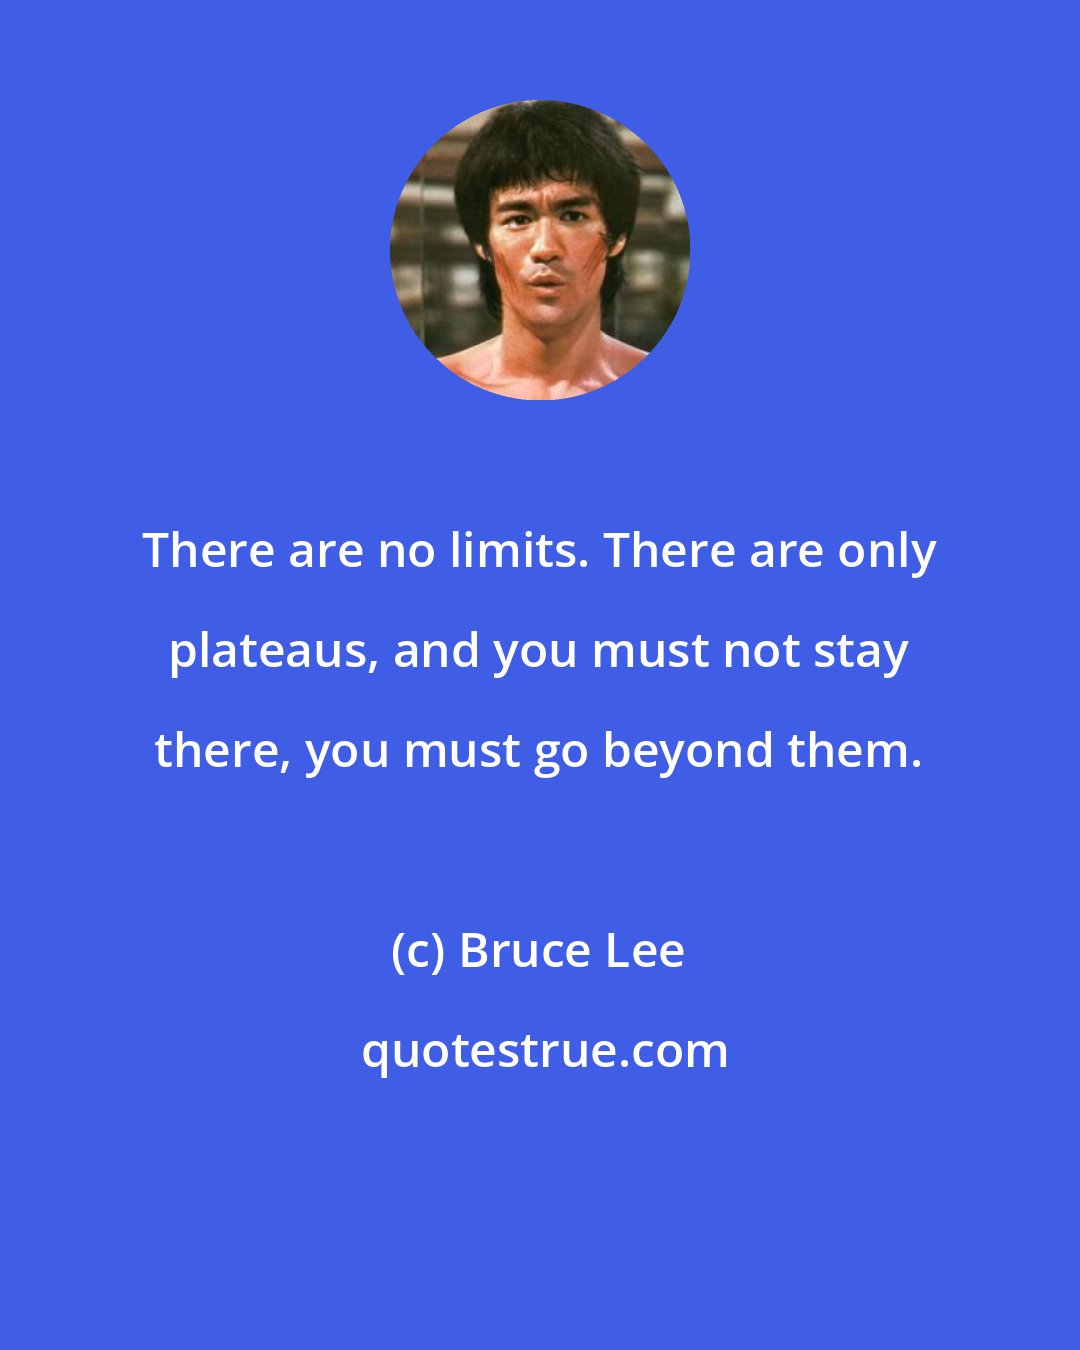 Bruce Lee: There are no limits. There are only plateaus, and you must not stay there, you must go beyond them.